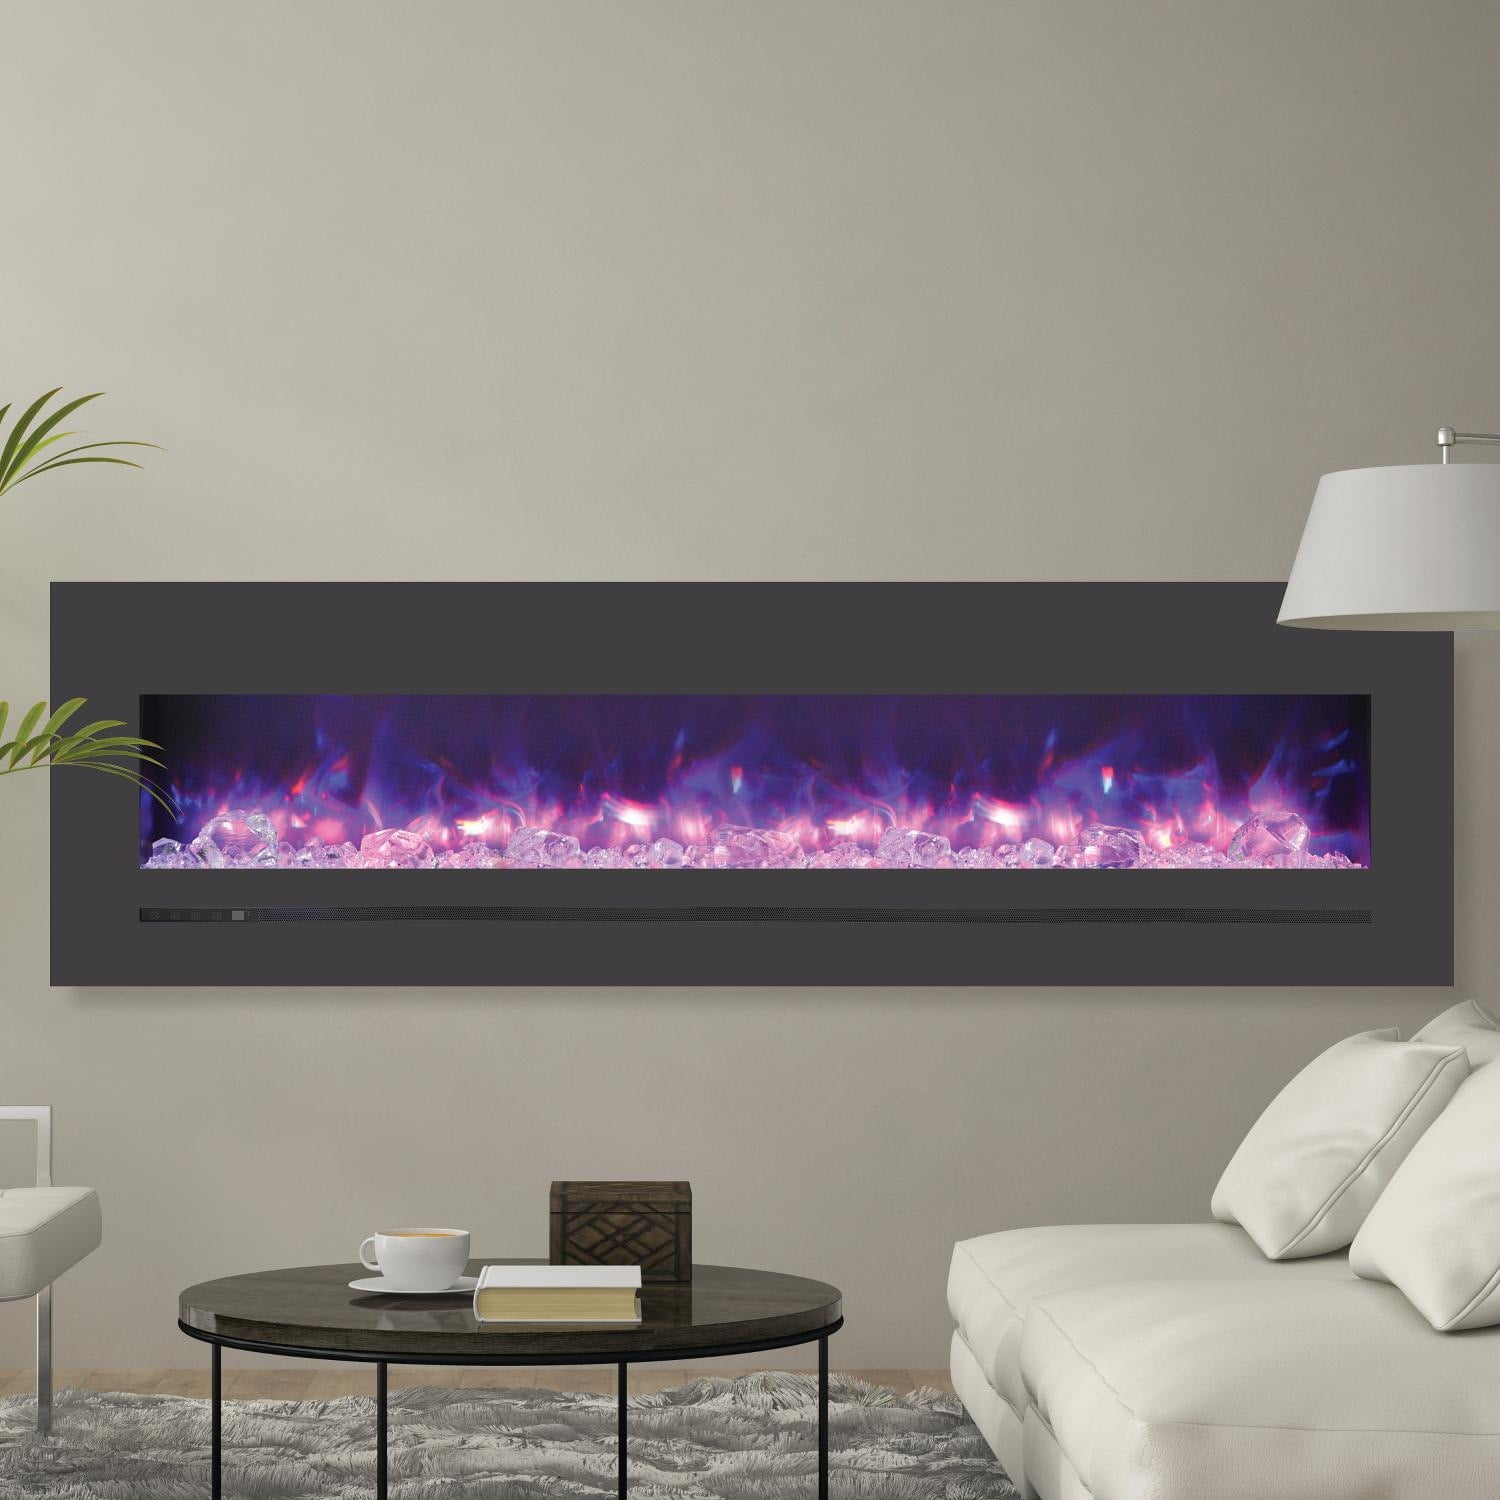 Wm-fml-72-7823-stl 26 In. Wall & Flush Mount Electric Linear Fireplace With Steel Surround & Clear Media